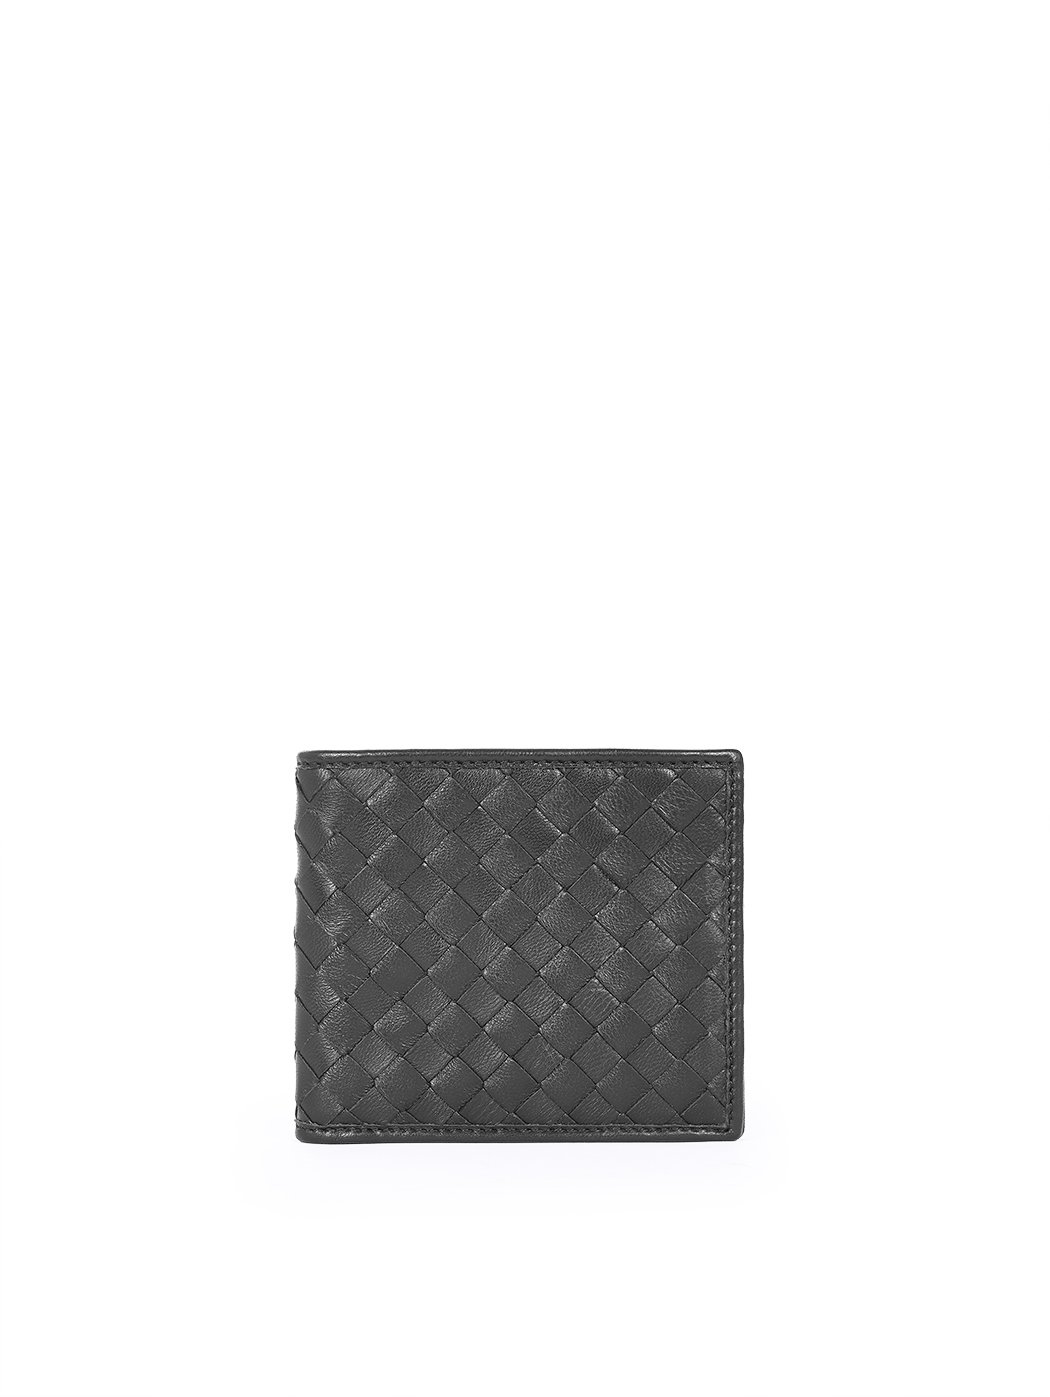 Black woven leather wallet